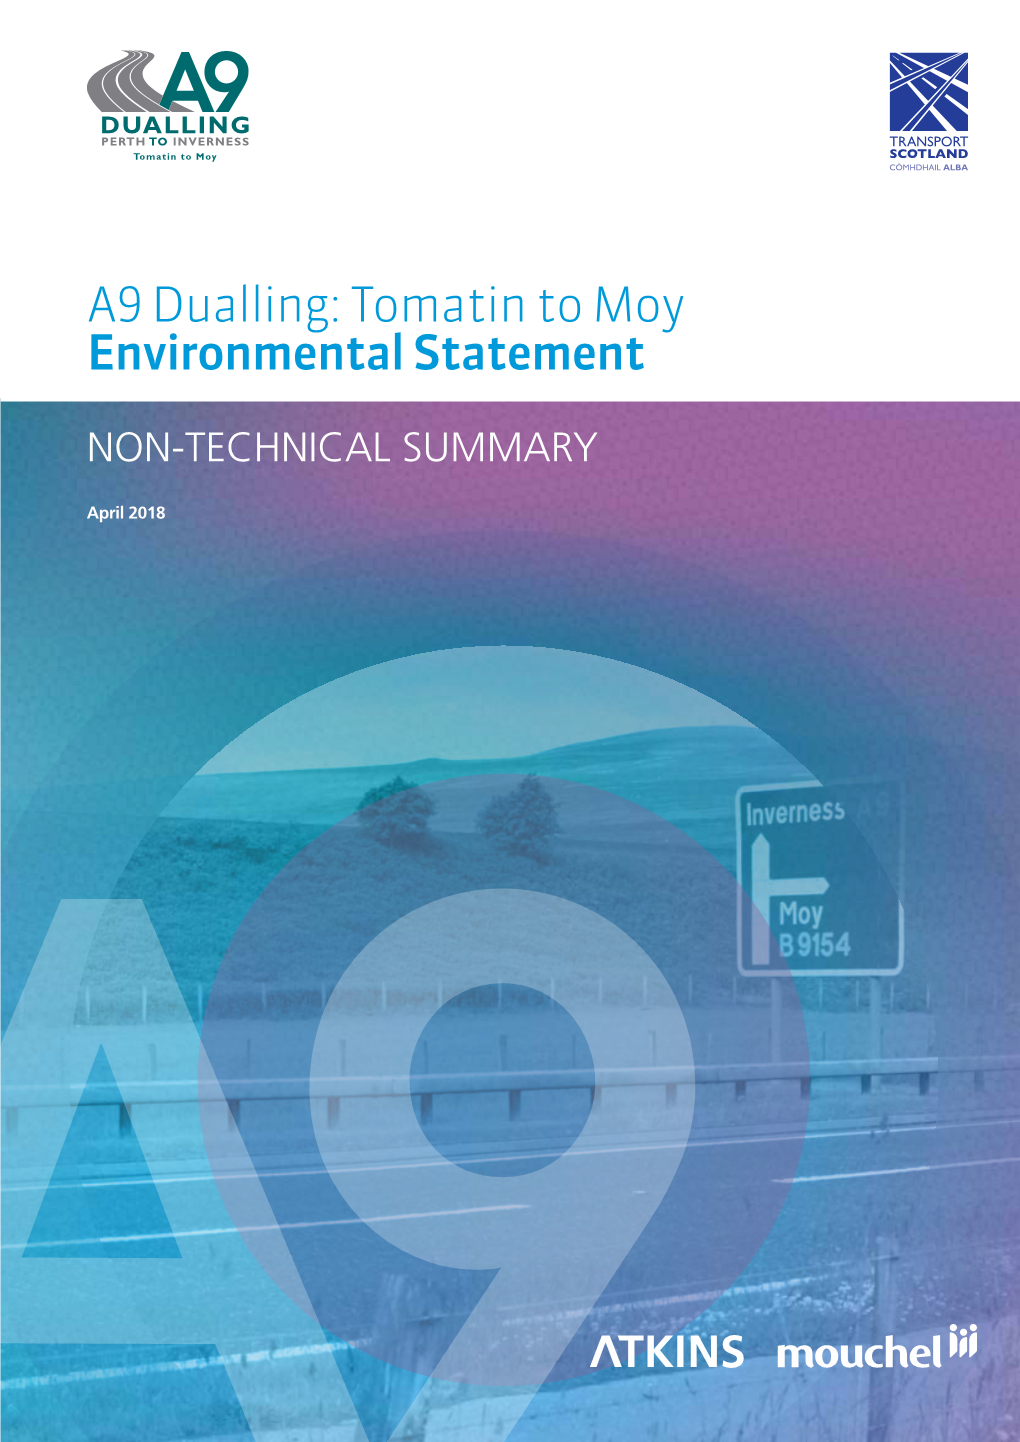 A9 Dualling: Tomatin to Moy Environmental Statement